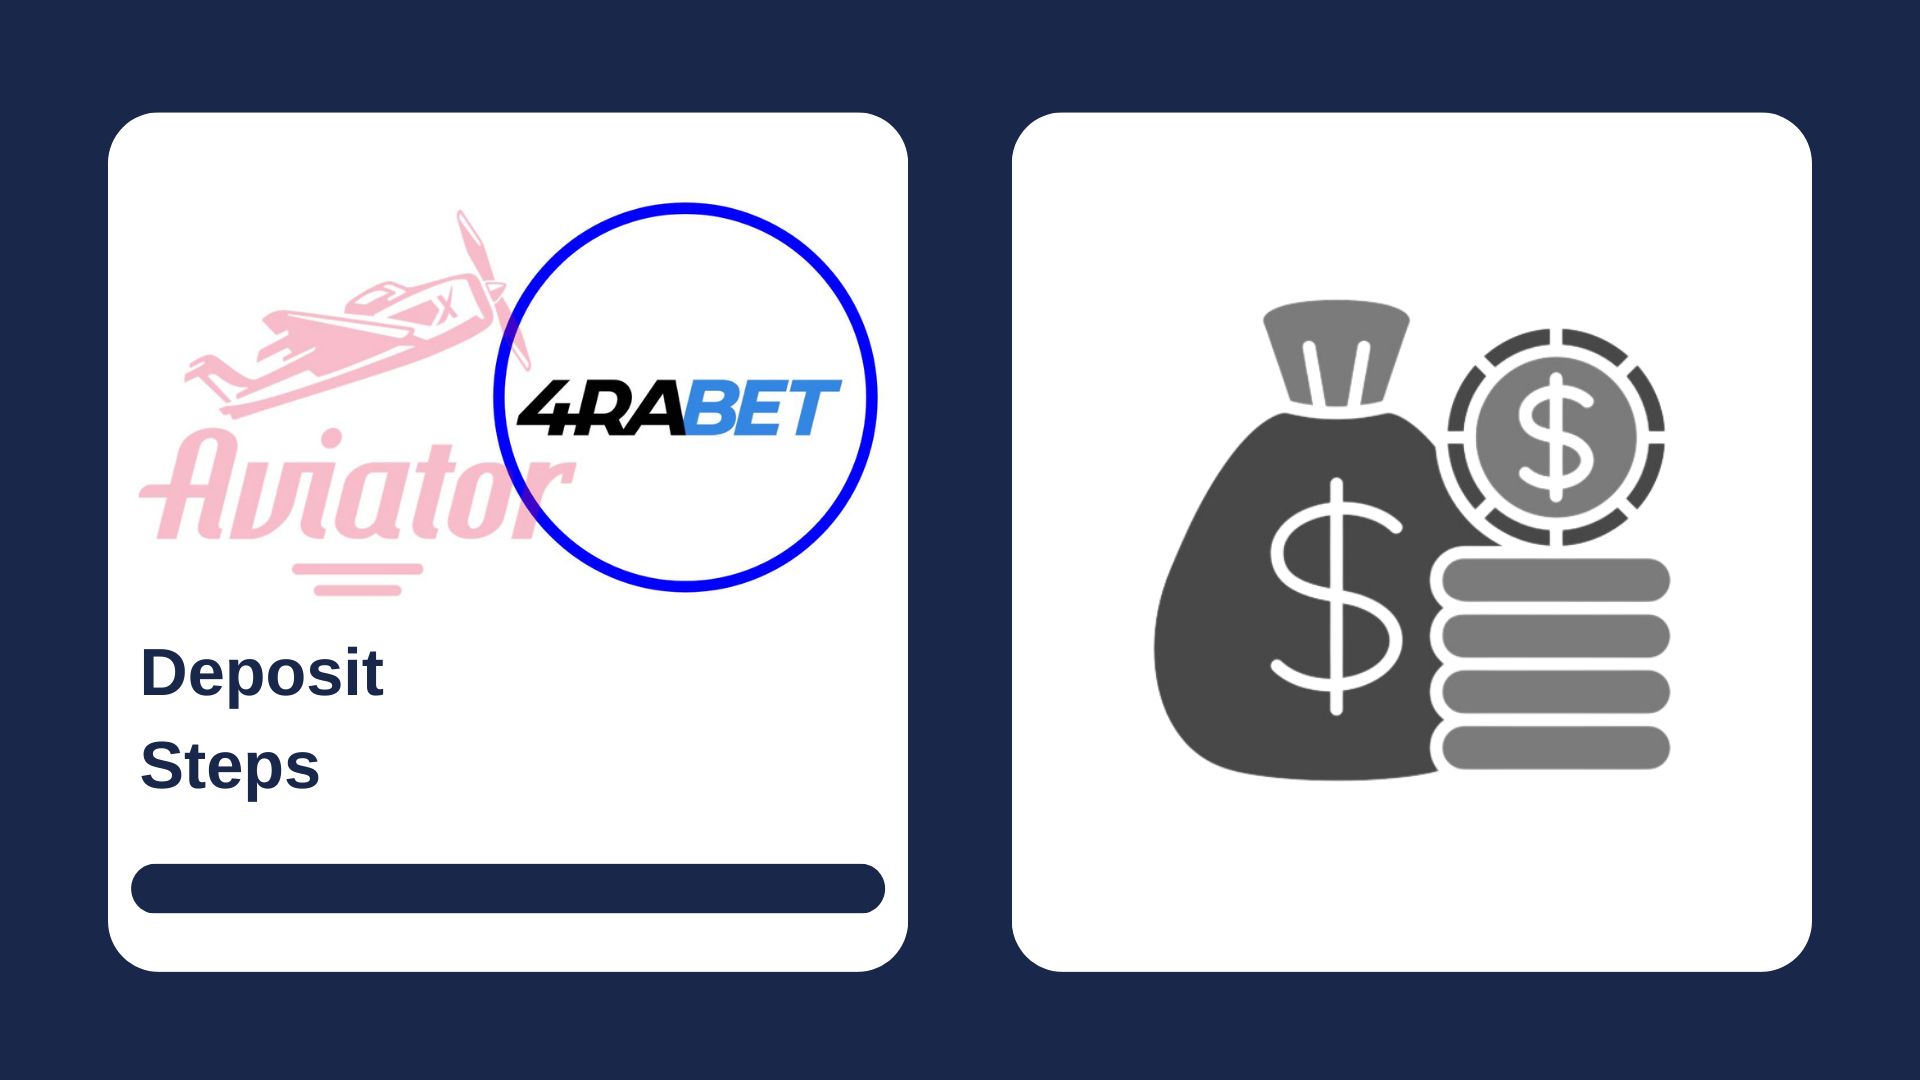 First picture showing Aviator and 4rabet logos with text, and second - deposit money icon